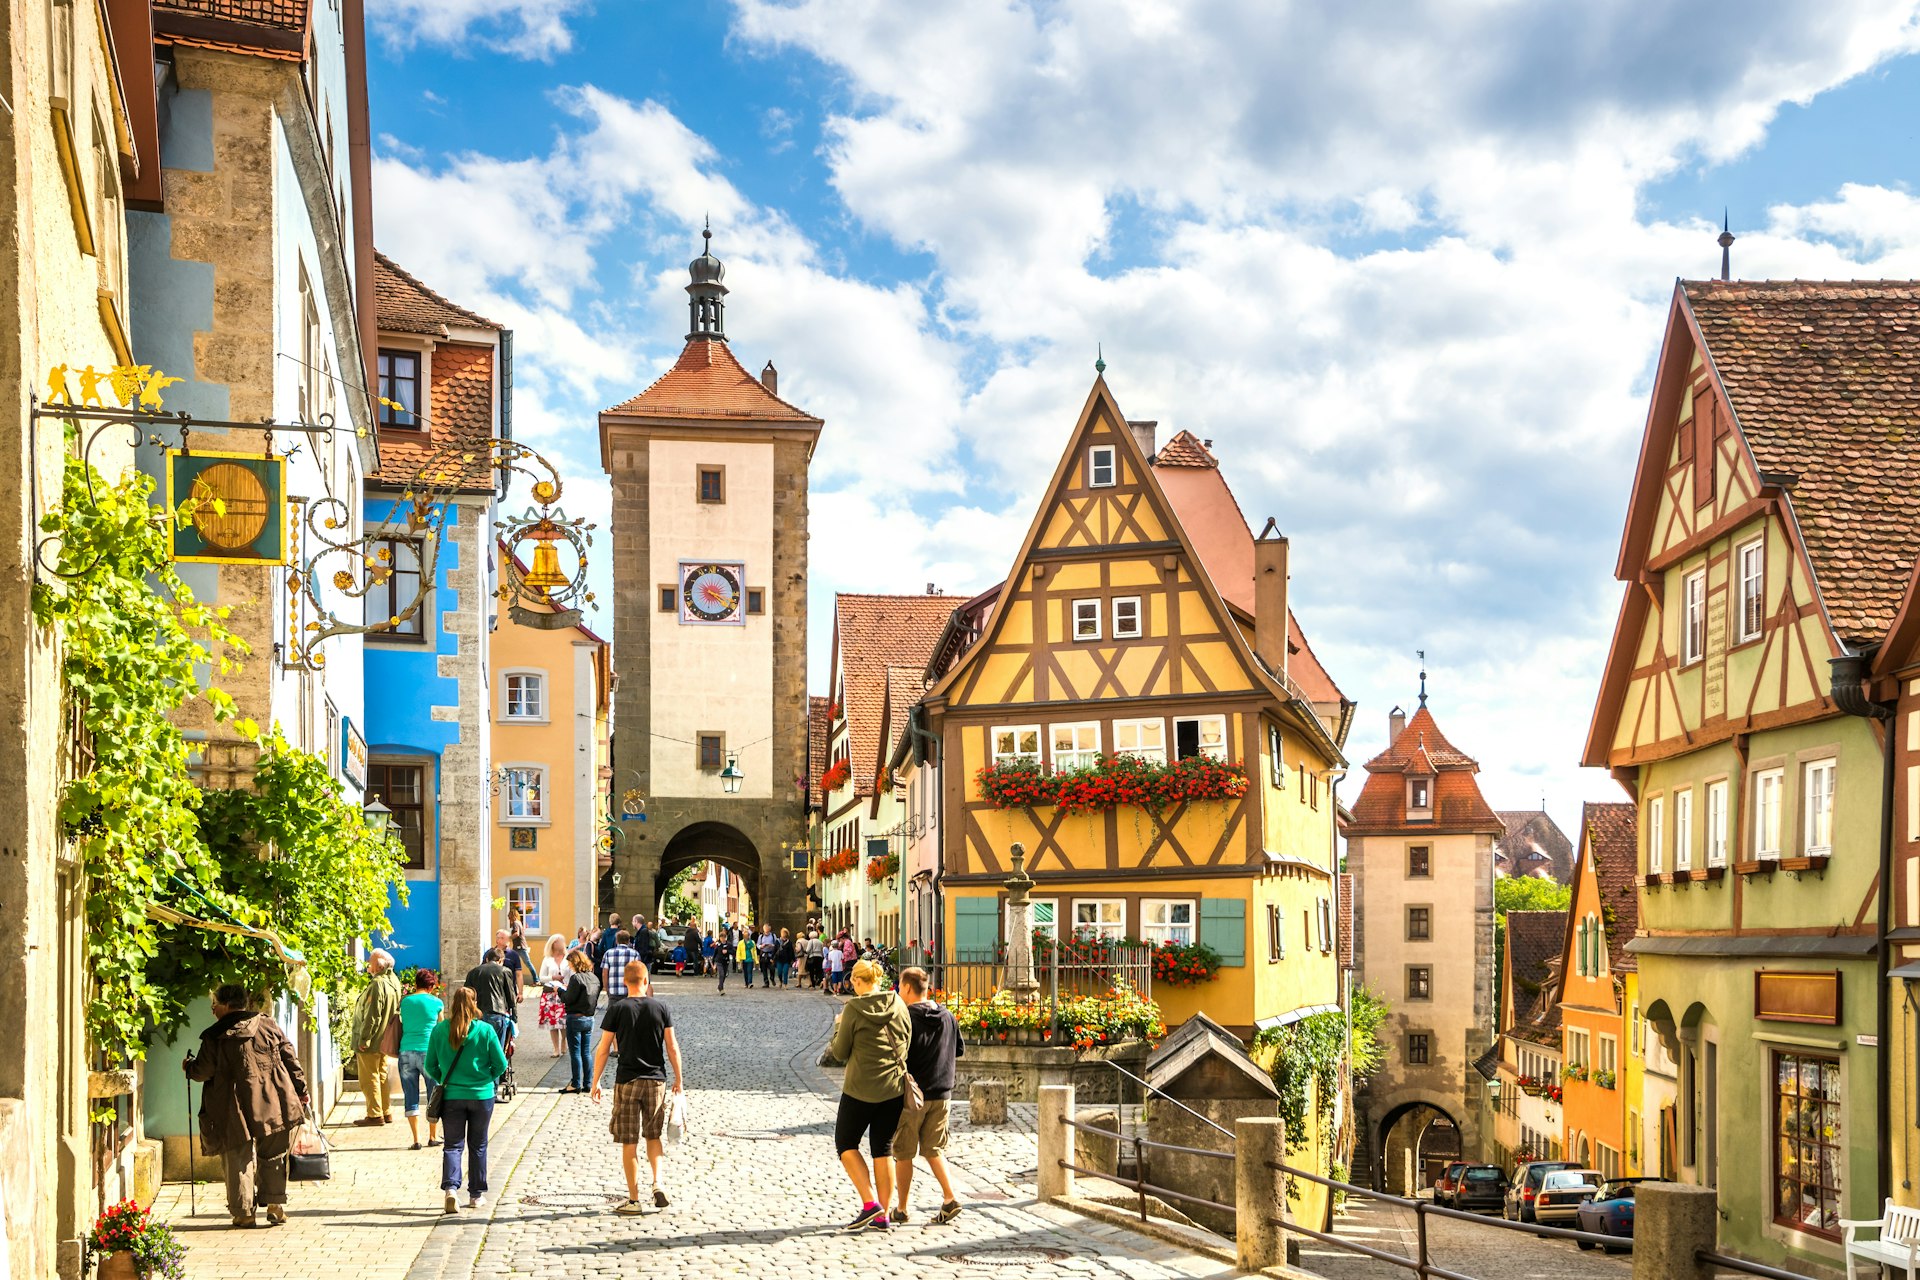 Timber framed houses and a clock tower in Rothenburg ob der Tauber.